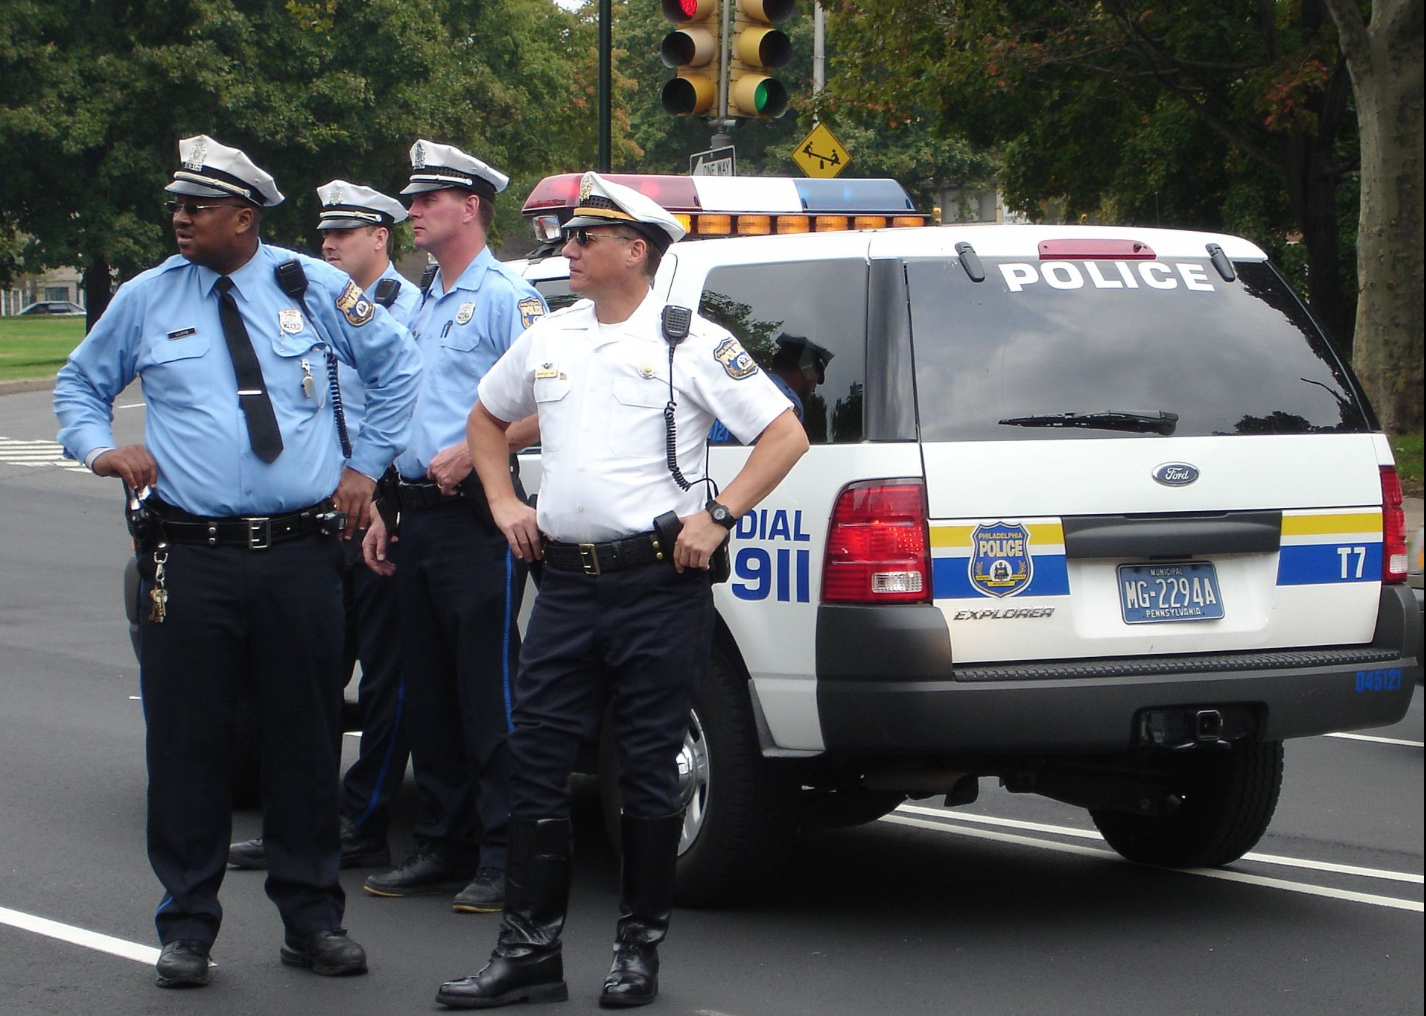 A photo of four Philadelphia police officers in uniform standing in the roadway next to a marked patrol explorer.